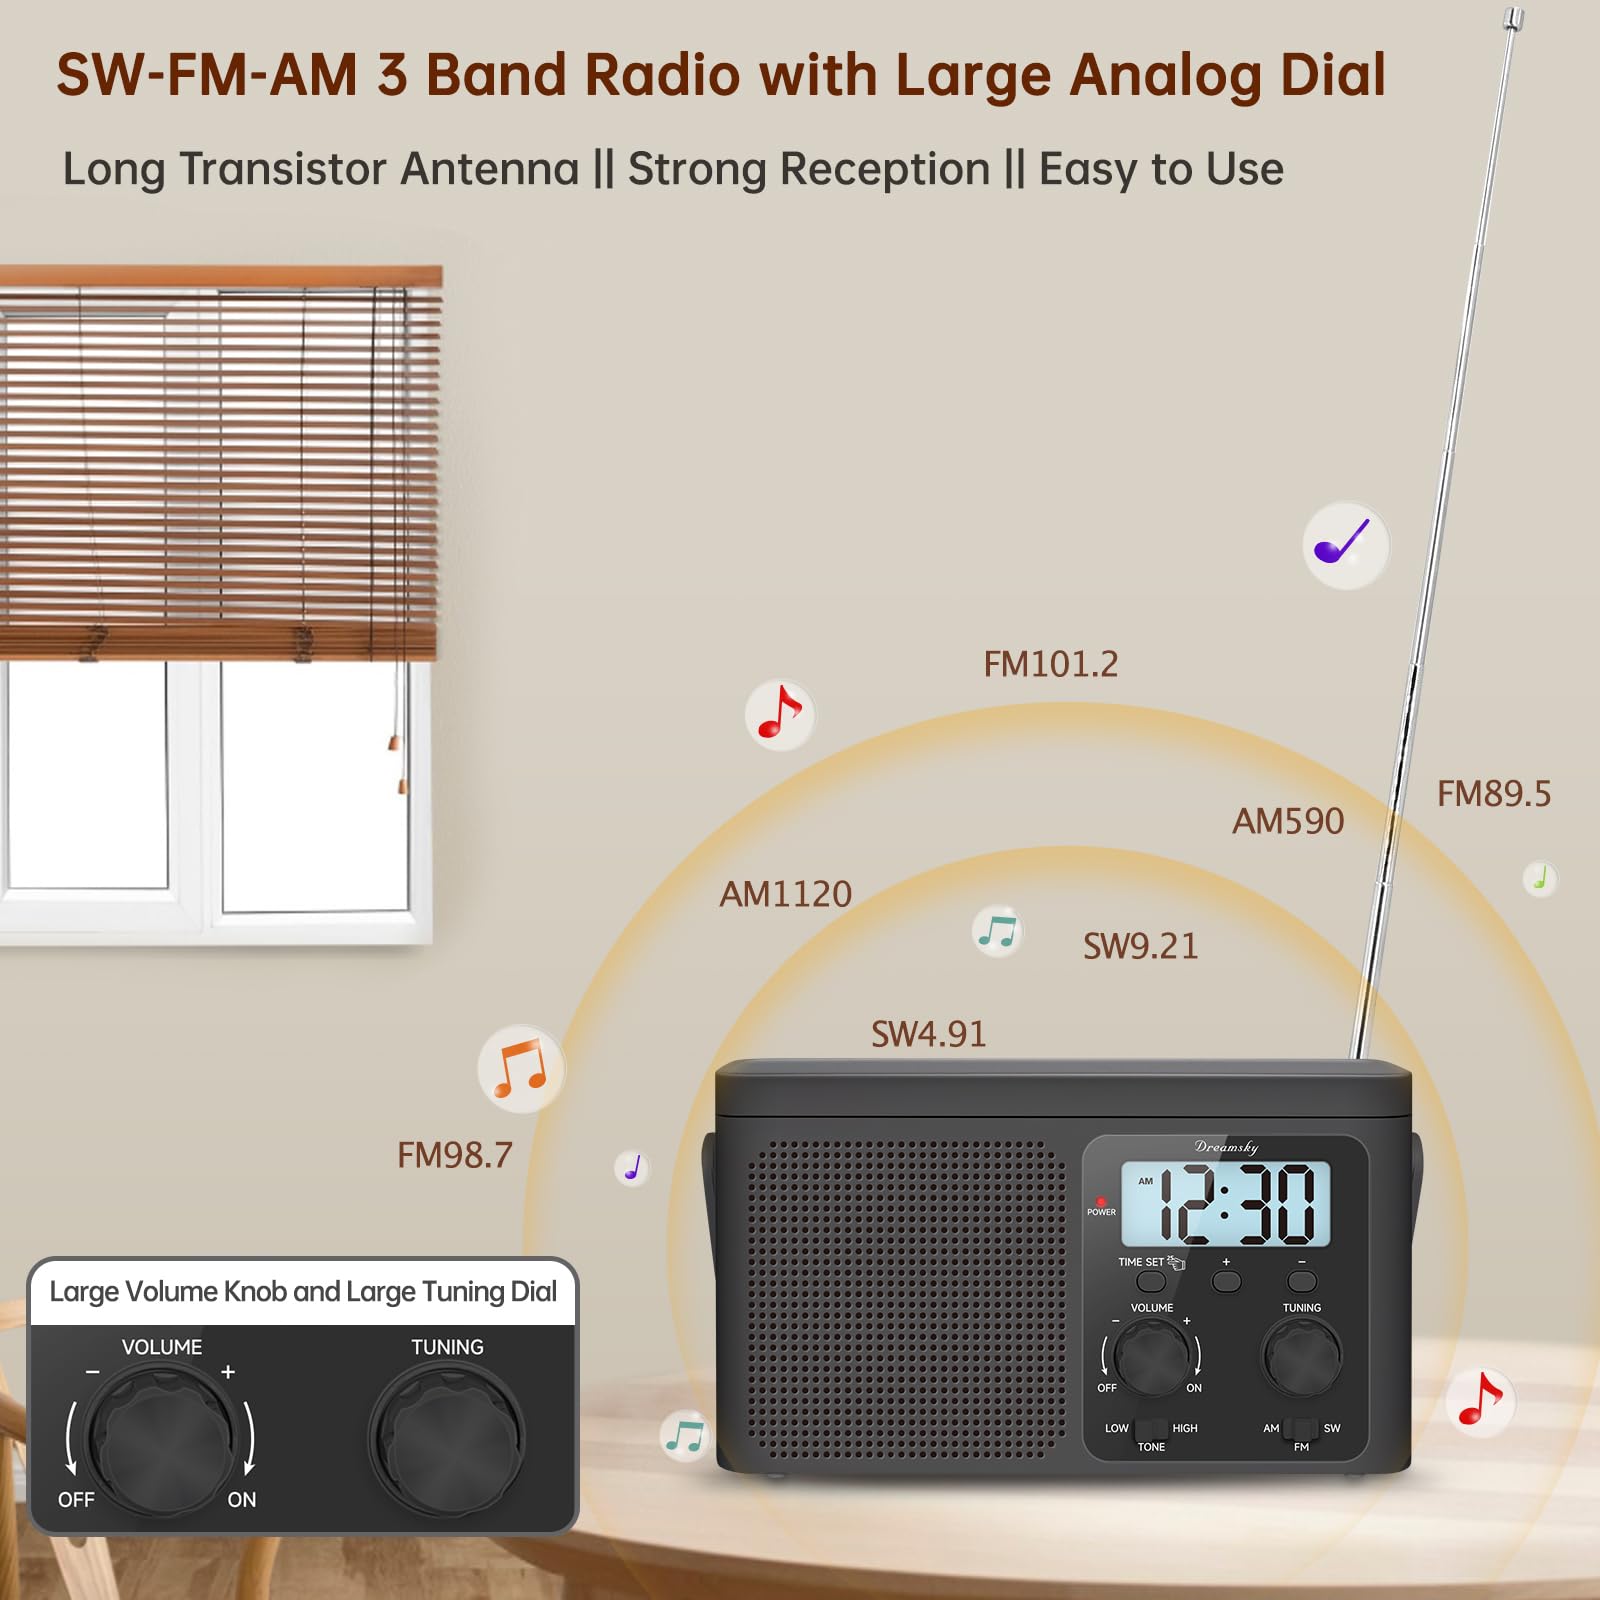 DreamSky Portable AM FM Shortwave Radio - Plug in Wall or Battery Powered, Transistor Antenna, Strong Reception, Large Analog Dial, Digital Display, 12/24Hr, Headphone Jack, Small Gfits for Seniors